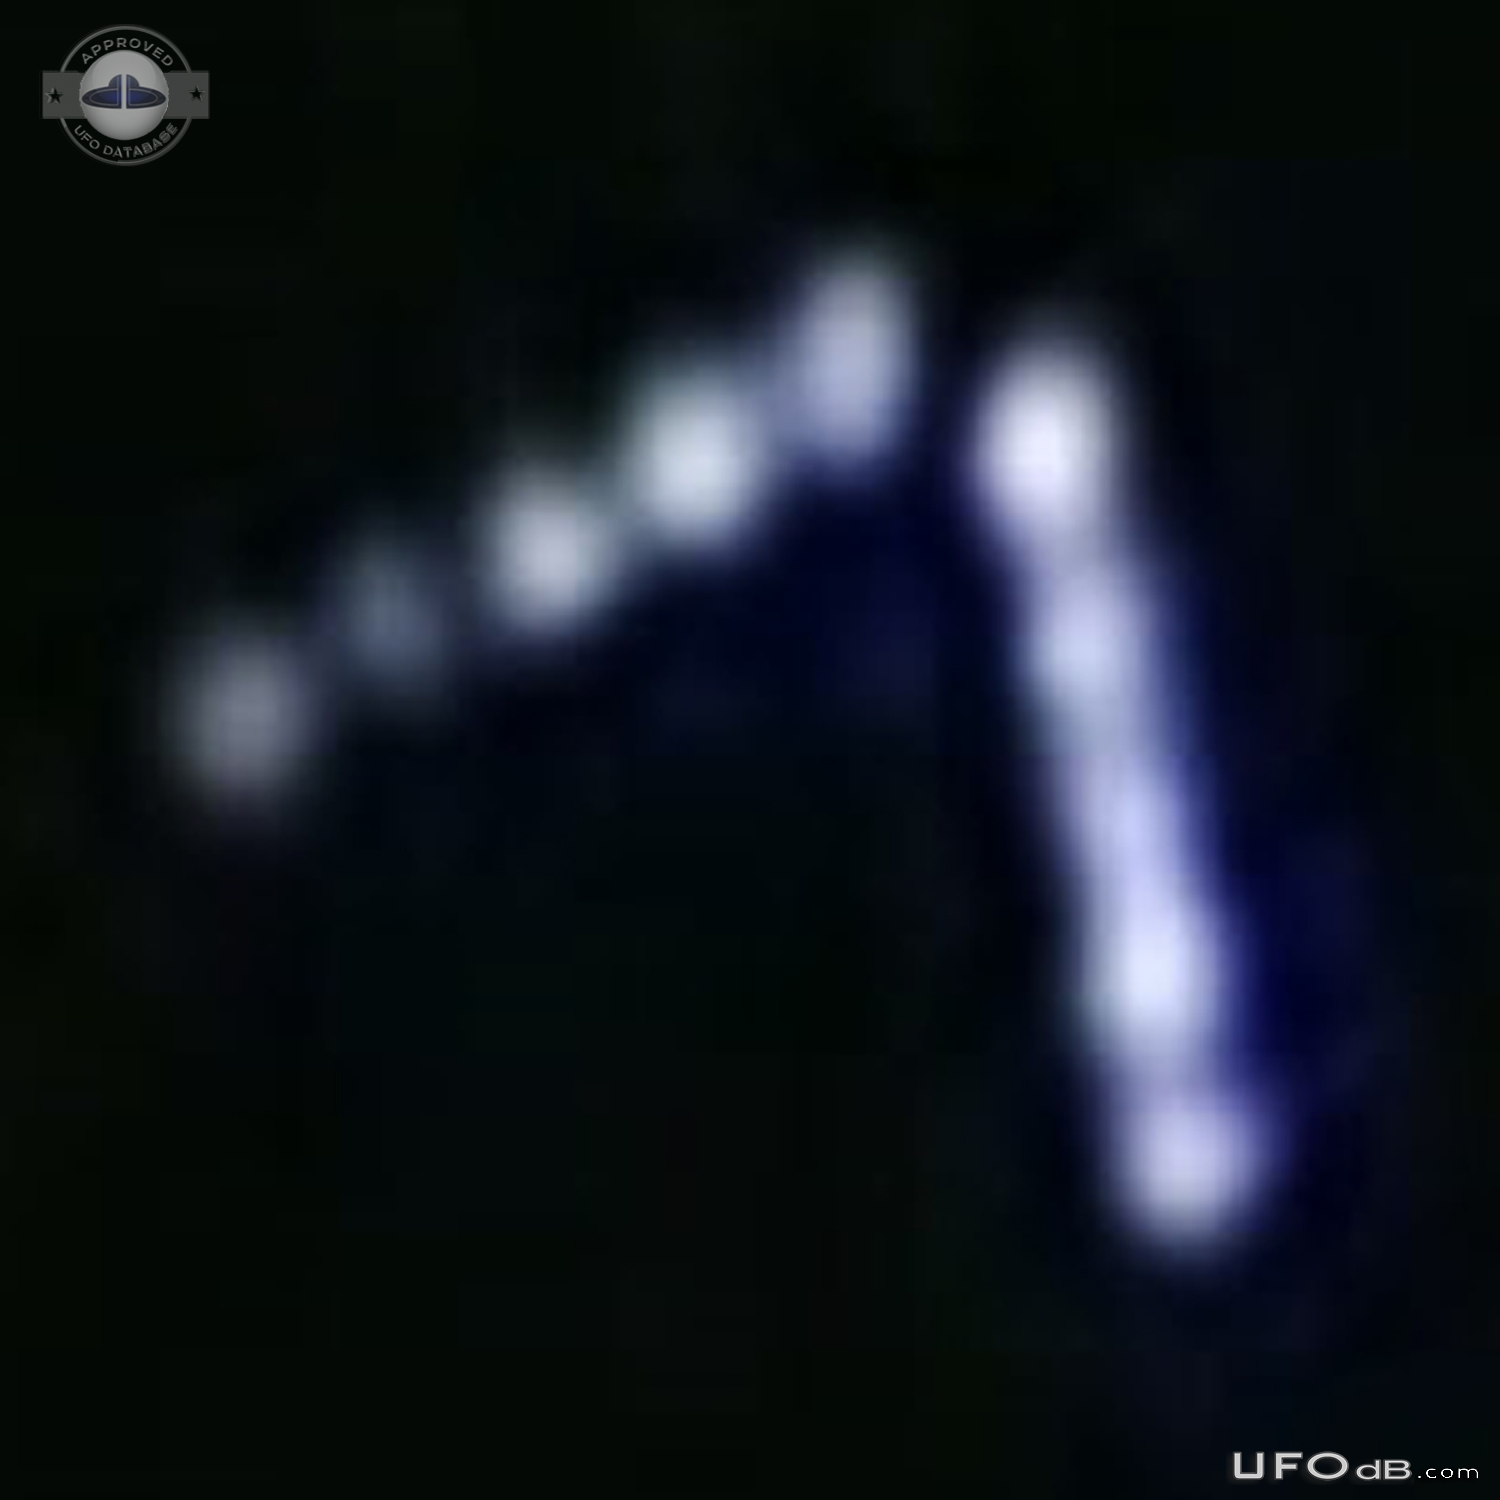 V-Shaped Silent Flying UFO Seen through thin clouds - Lehigh Acres Flo UFO Picture #735-4